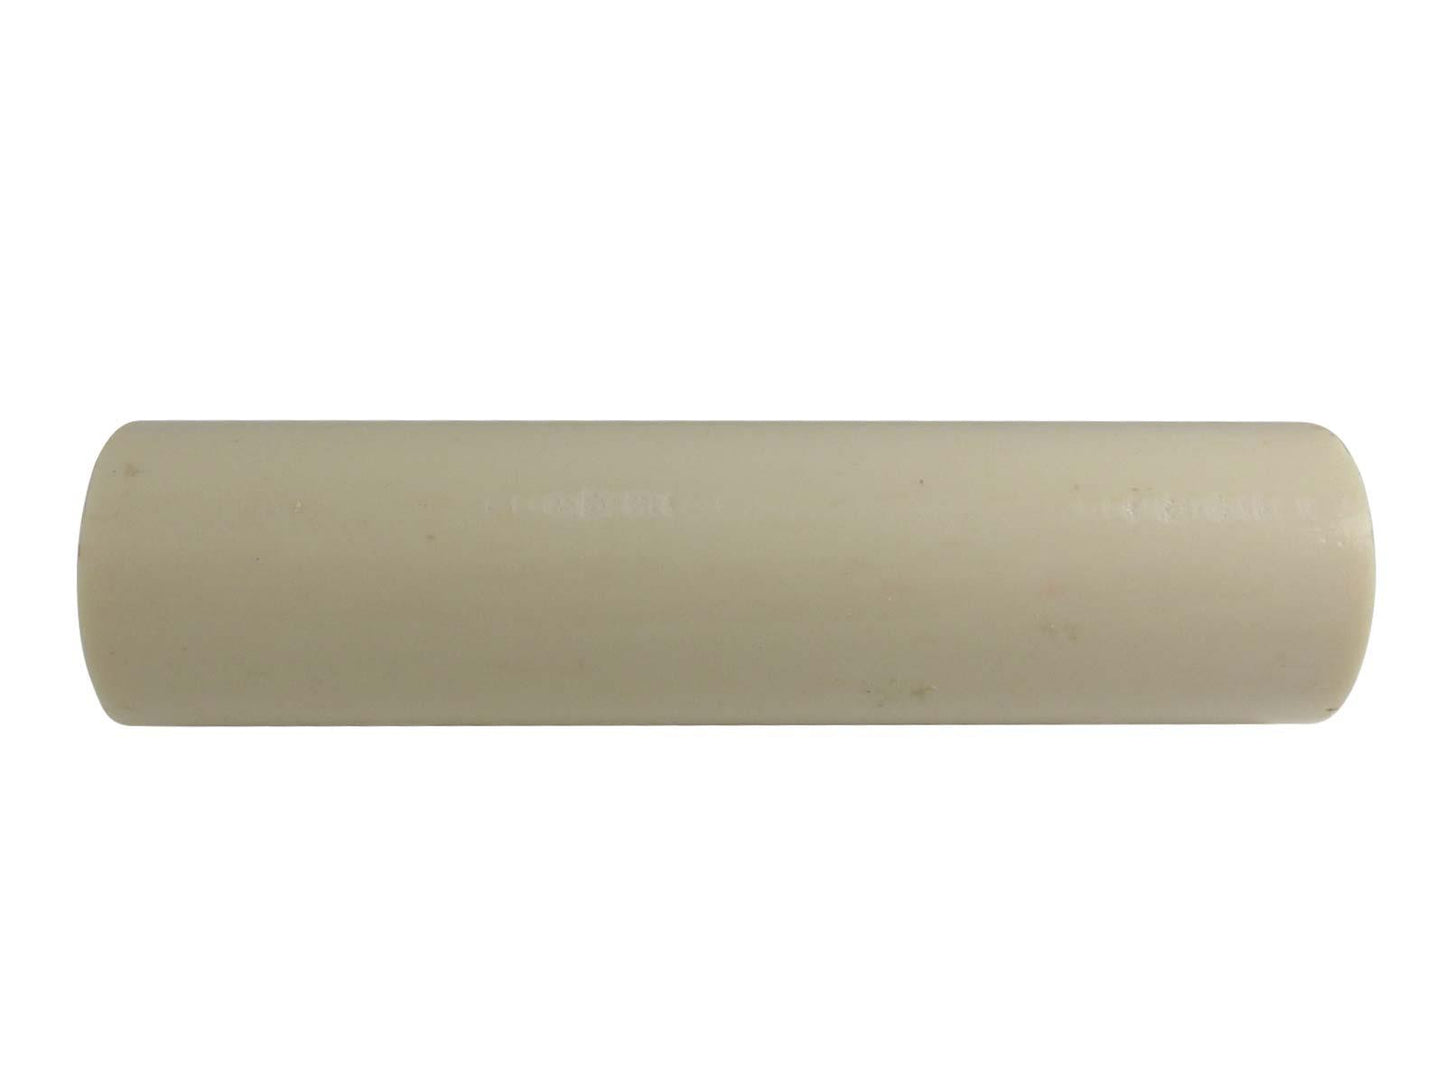 Turners' Mill Ivory Polyester Turning Blank - 152.4x39x39mm (6x1.54x1.54")